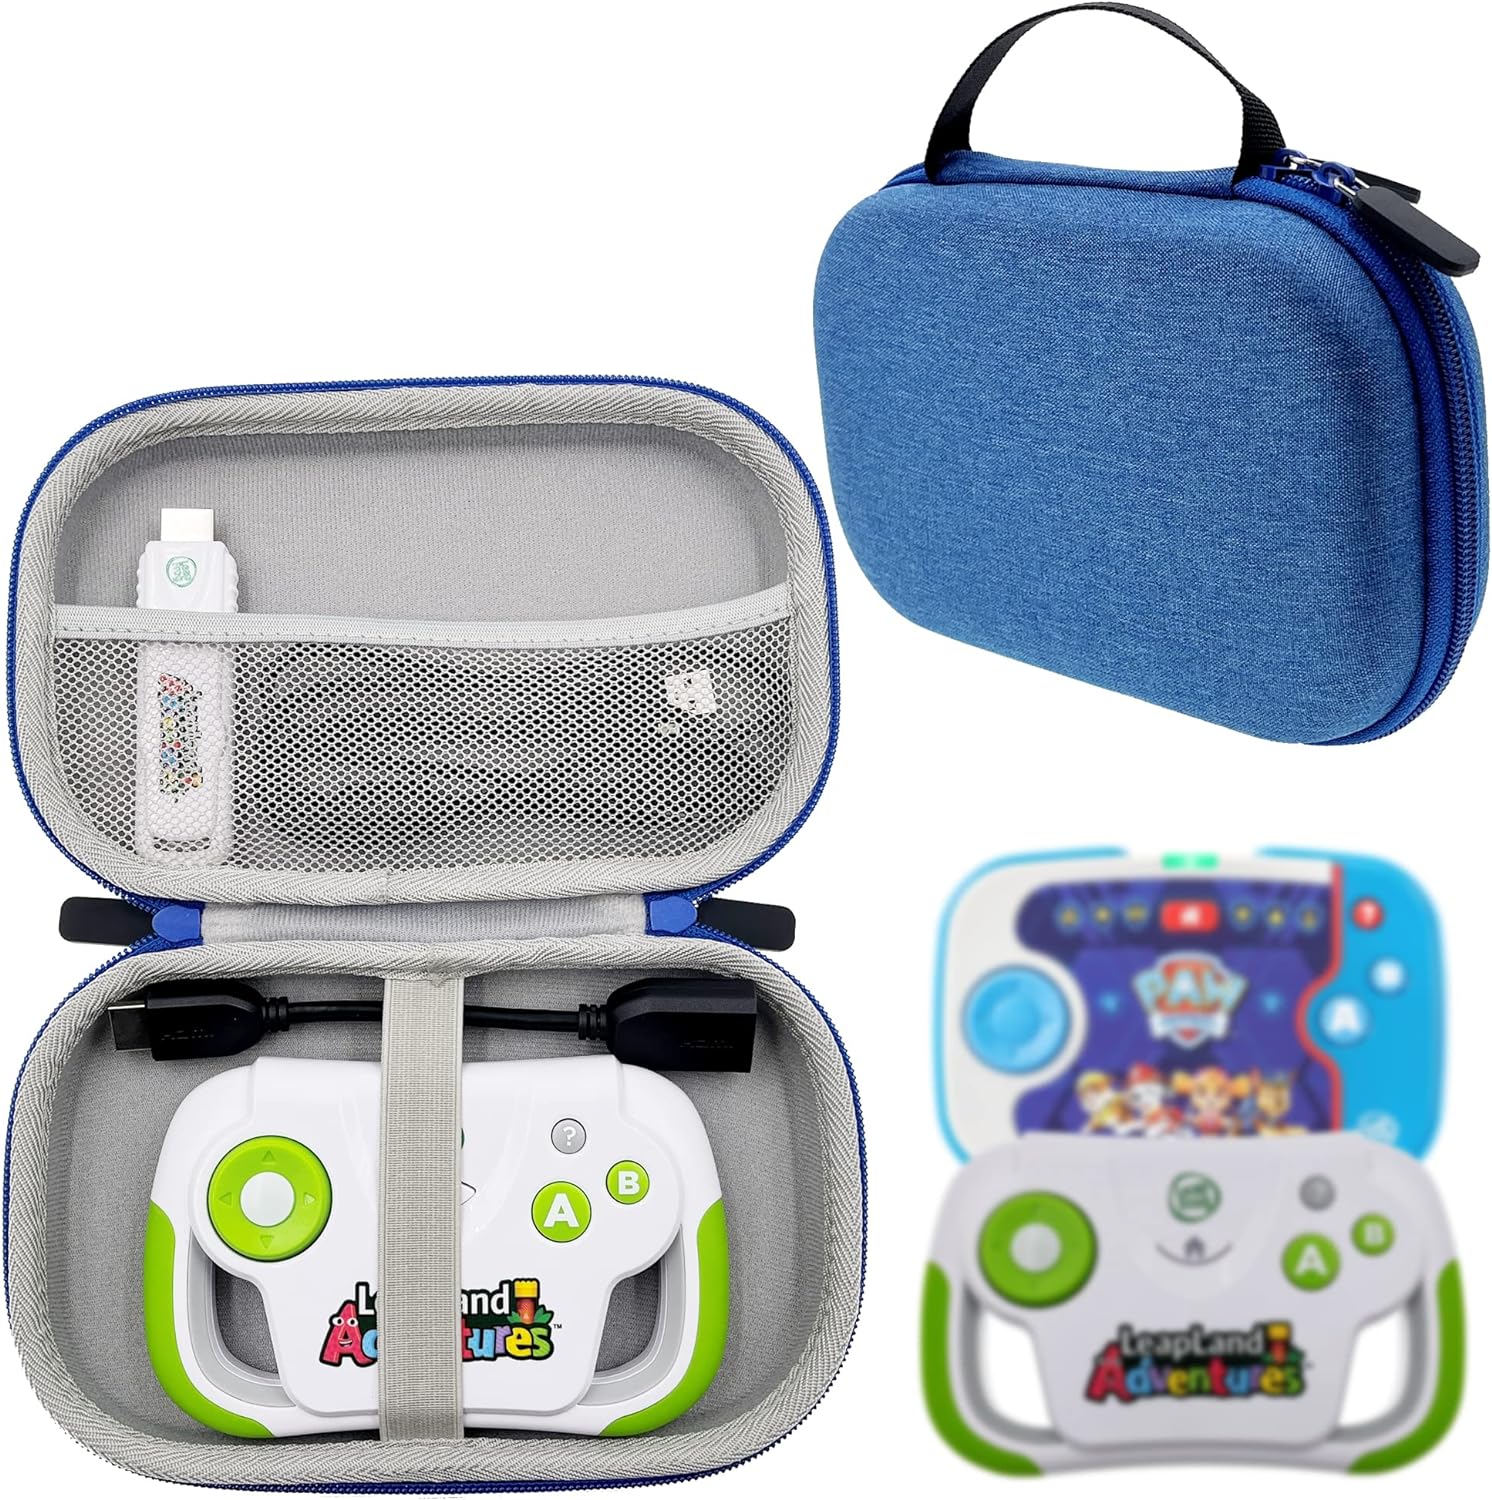 Tube Hard EVA case compatible with wireless controllers HDMI gaming sticks USB power cord accessories Storage Travel case (case only) and Leapfrog LeapLand Adventures/Leapfrog PAW Patrol